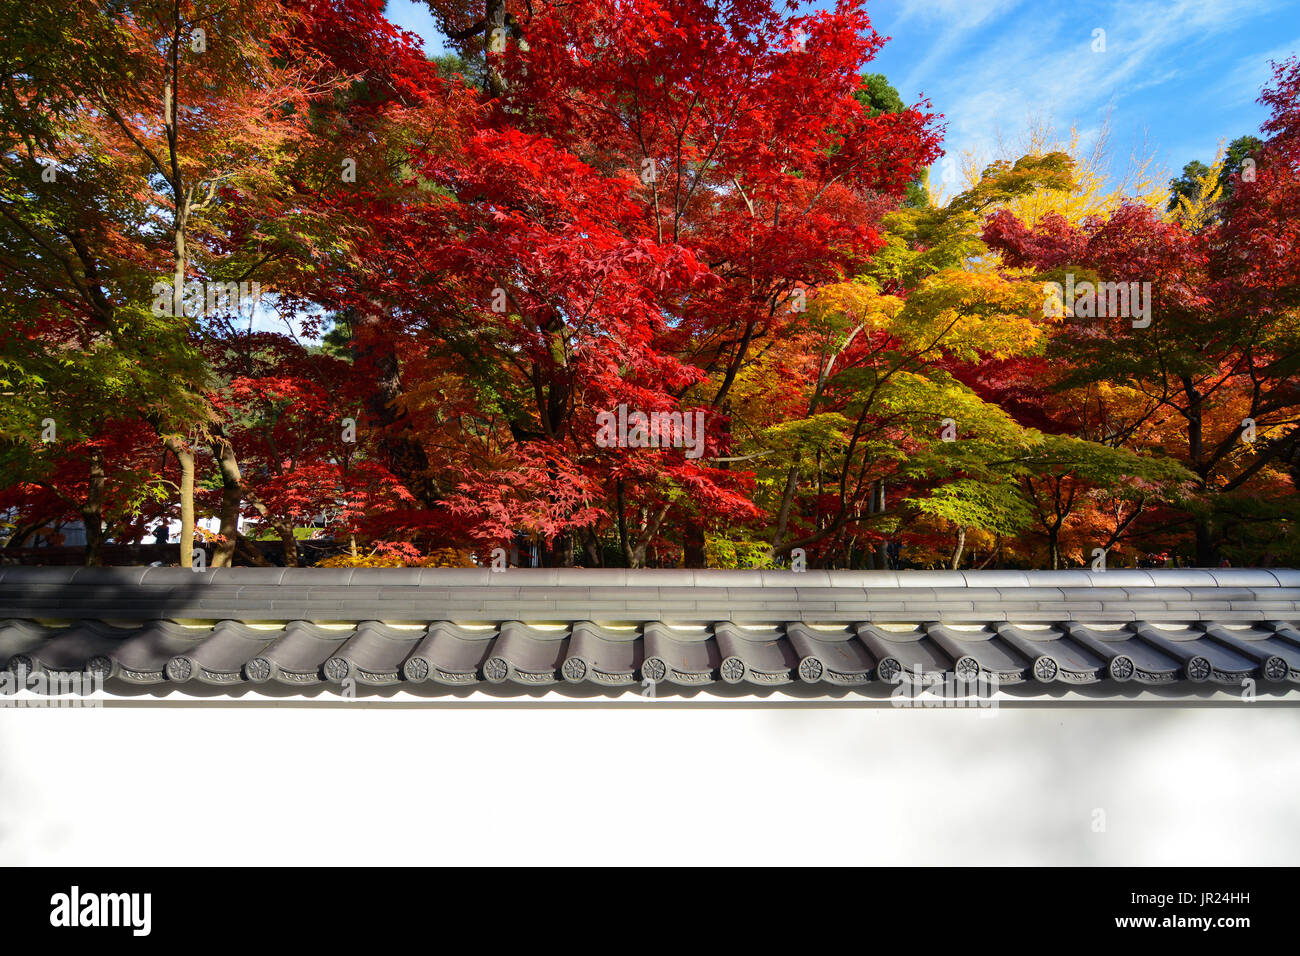 Oriental background of fall maple trees and a traditional Japanese wall crowned with tiles Stock Photo